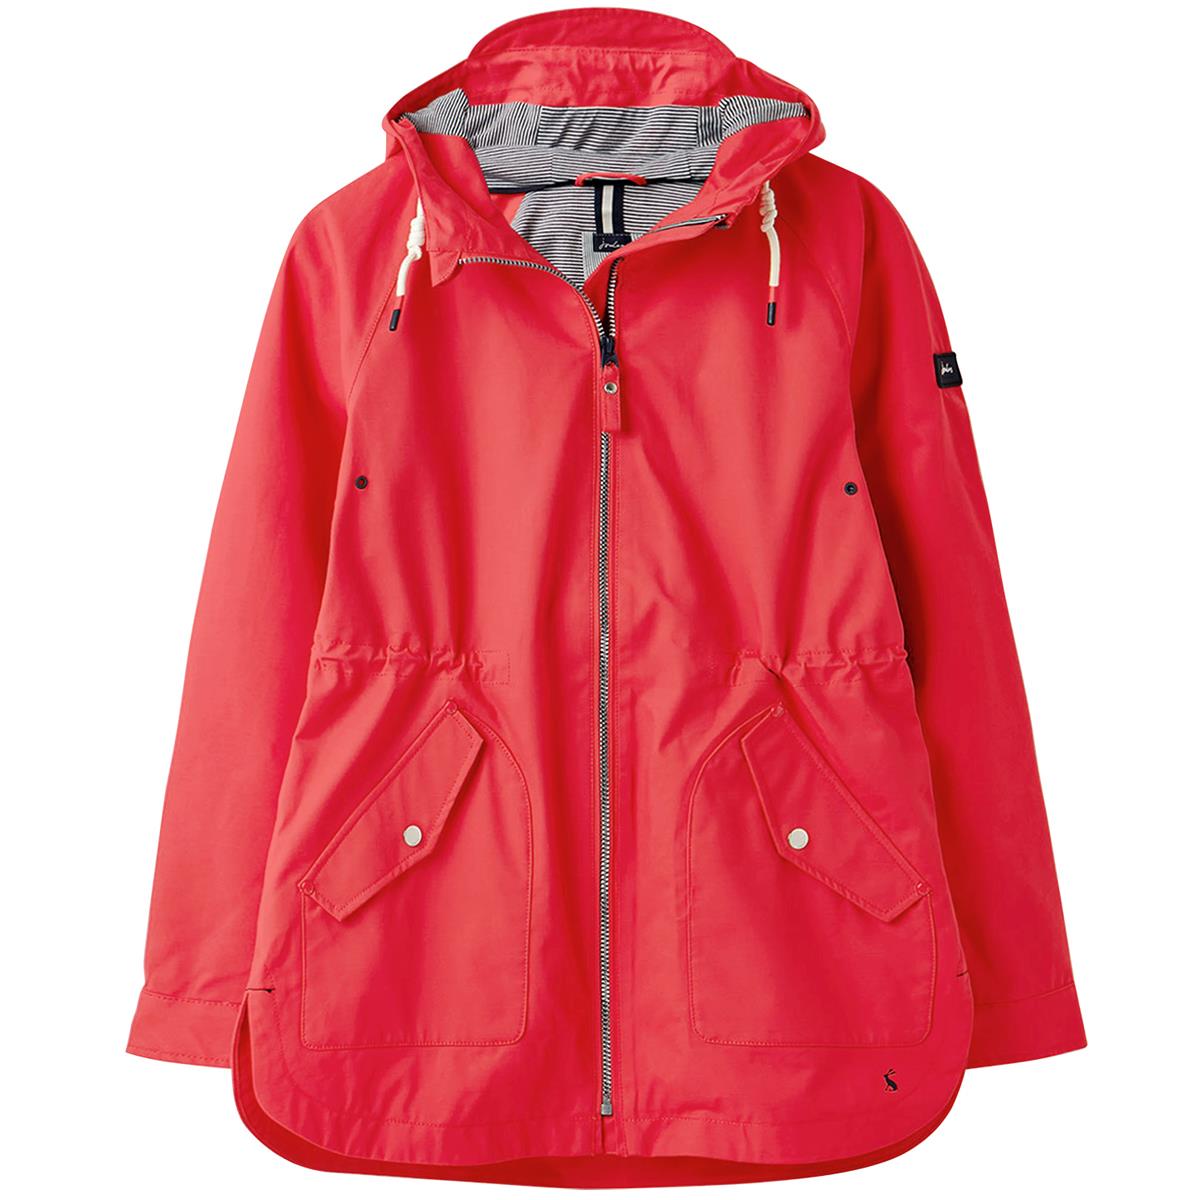 What is the ref number for the Joules Shoreside Coastal Waterproof Jacket?